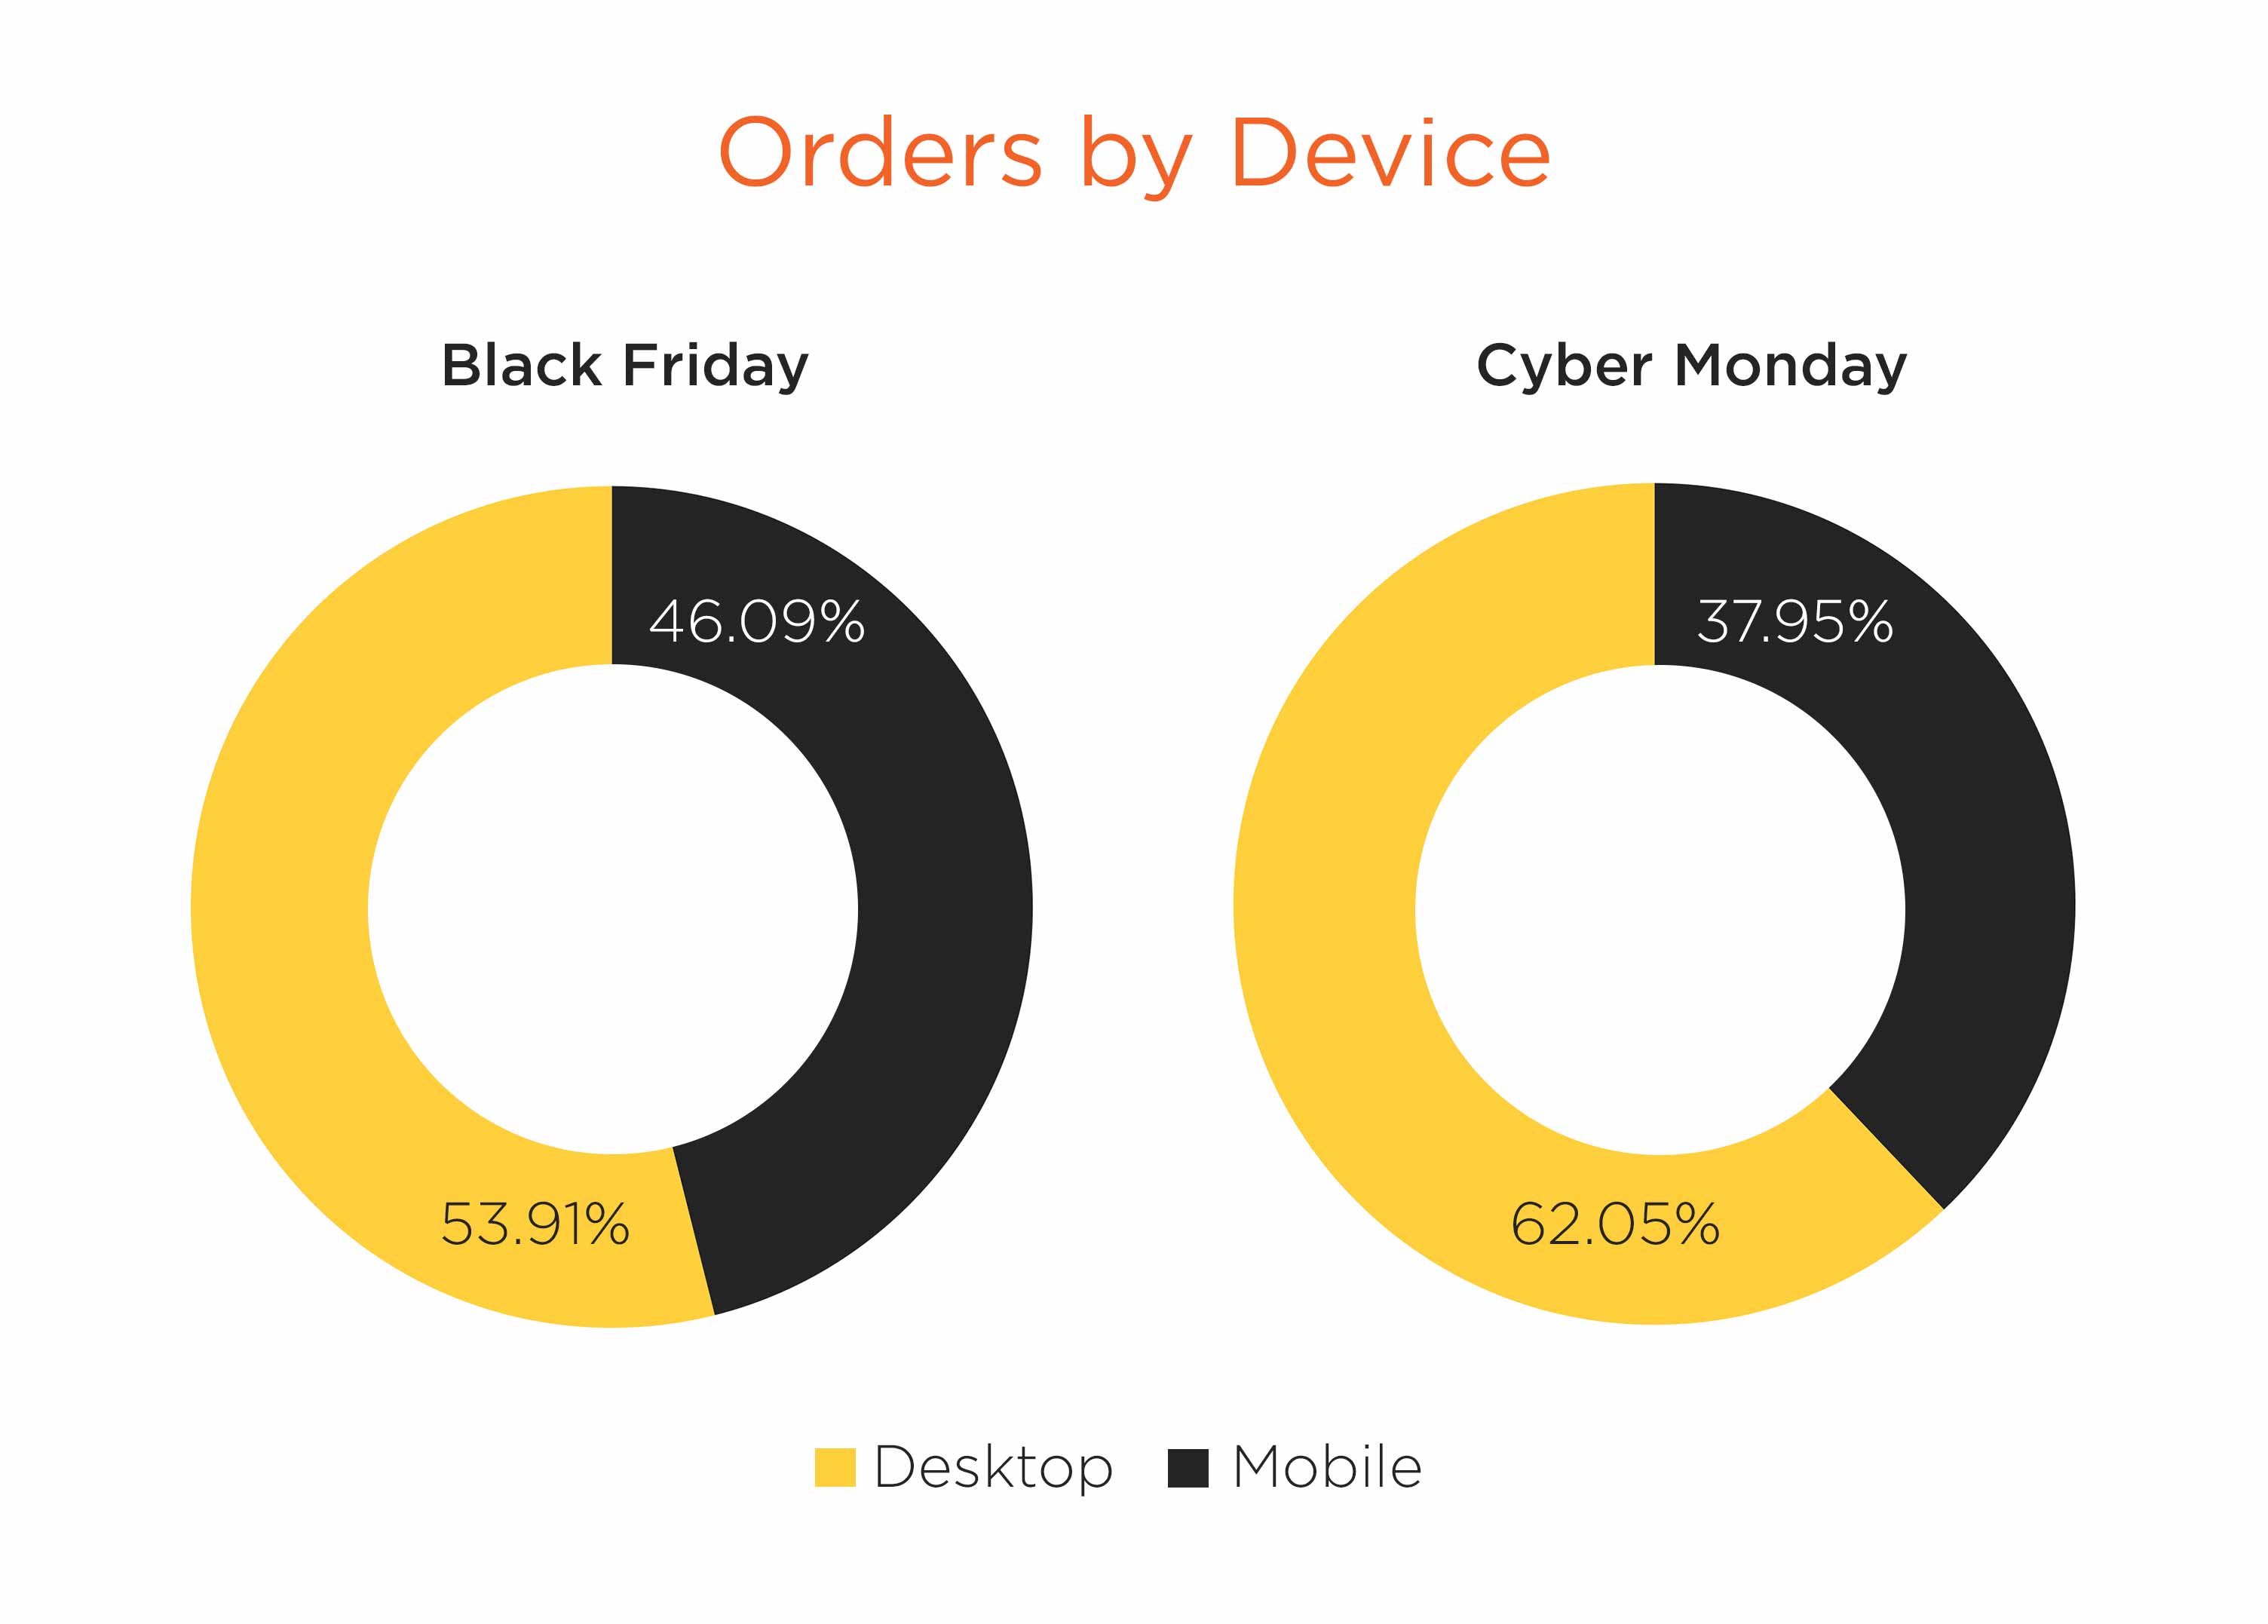 Black Friday and Cyber Monday Orders by Device